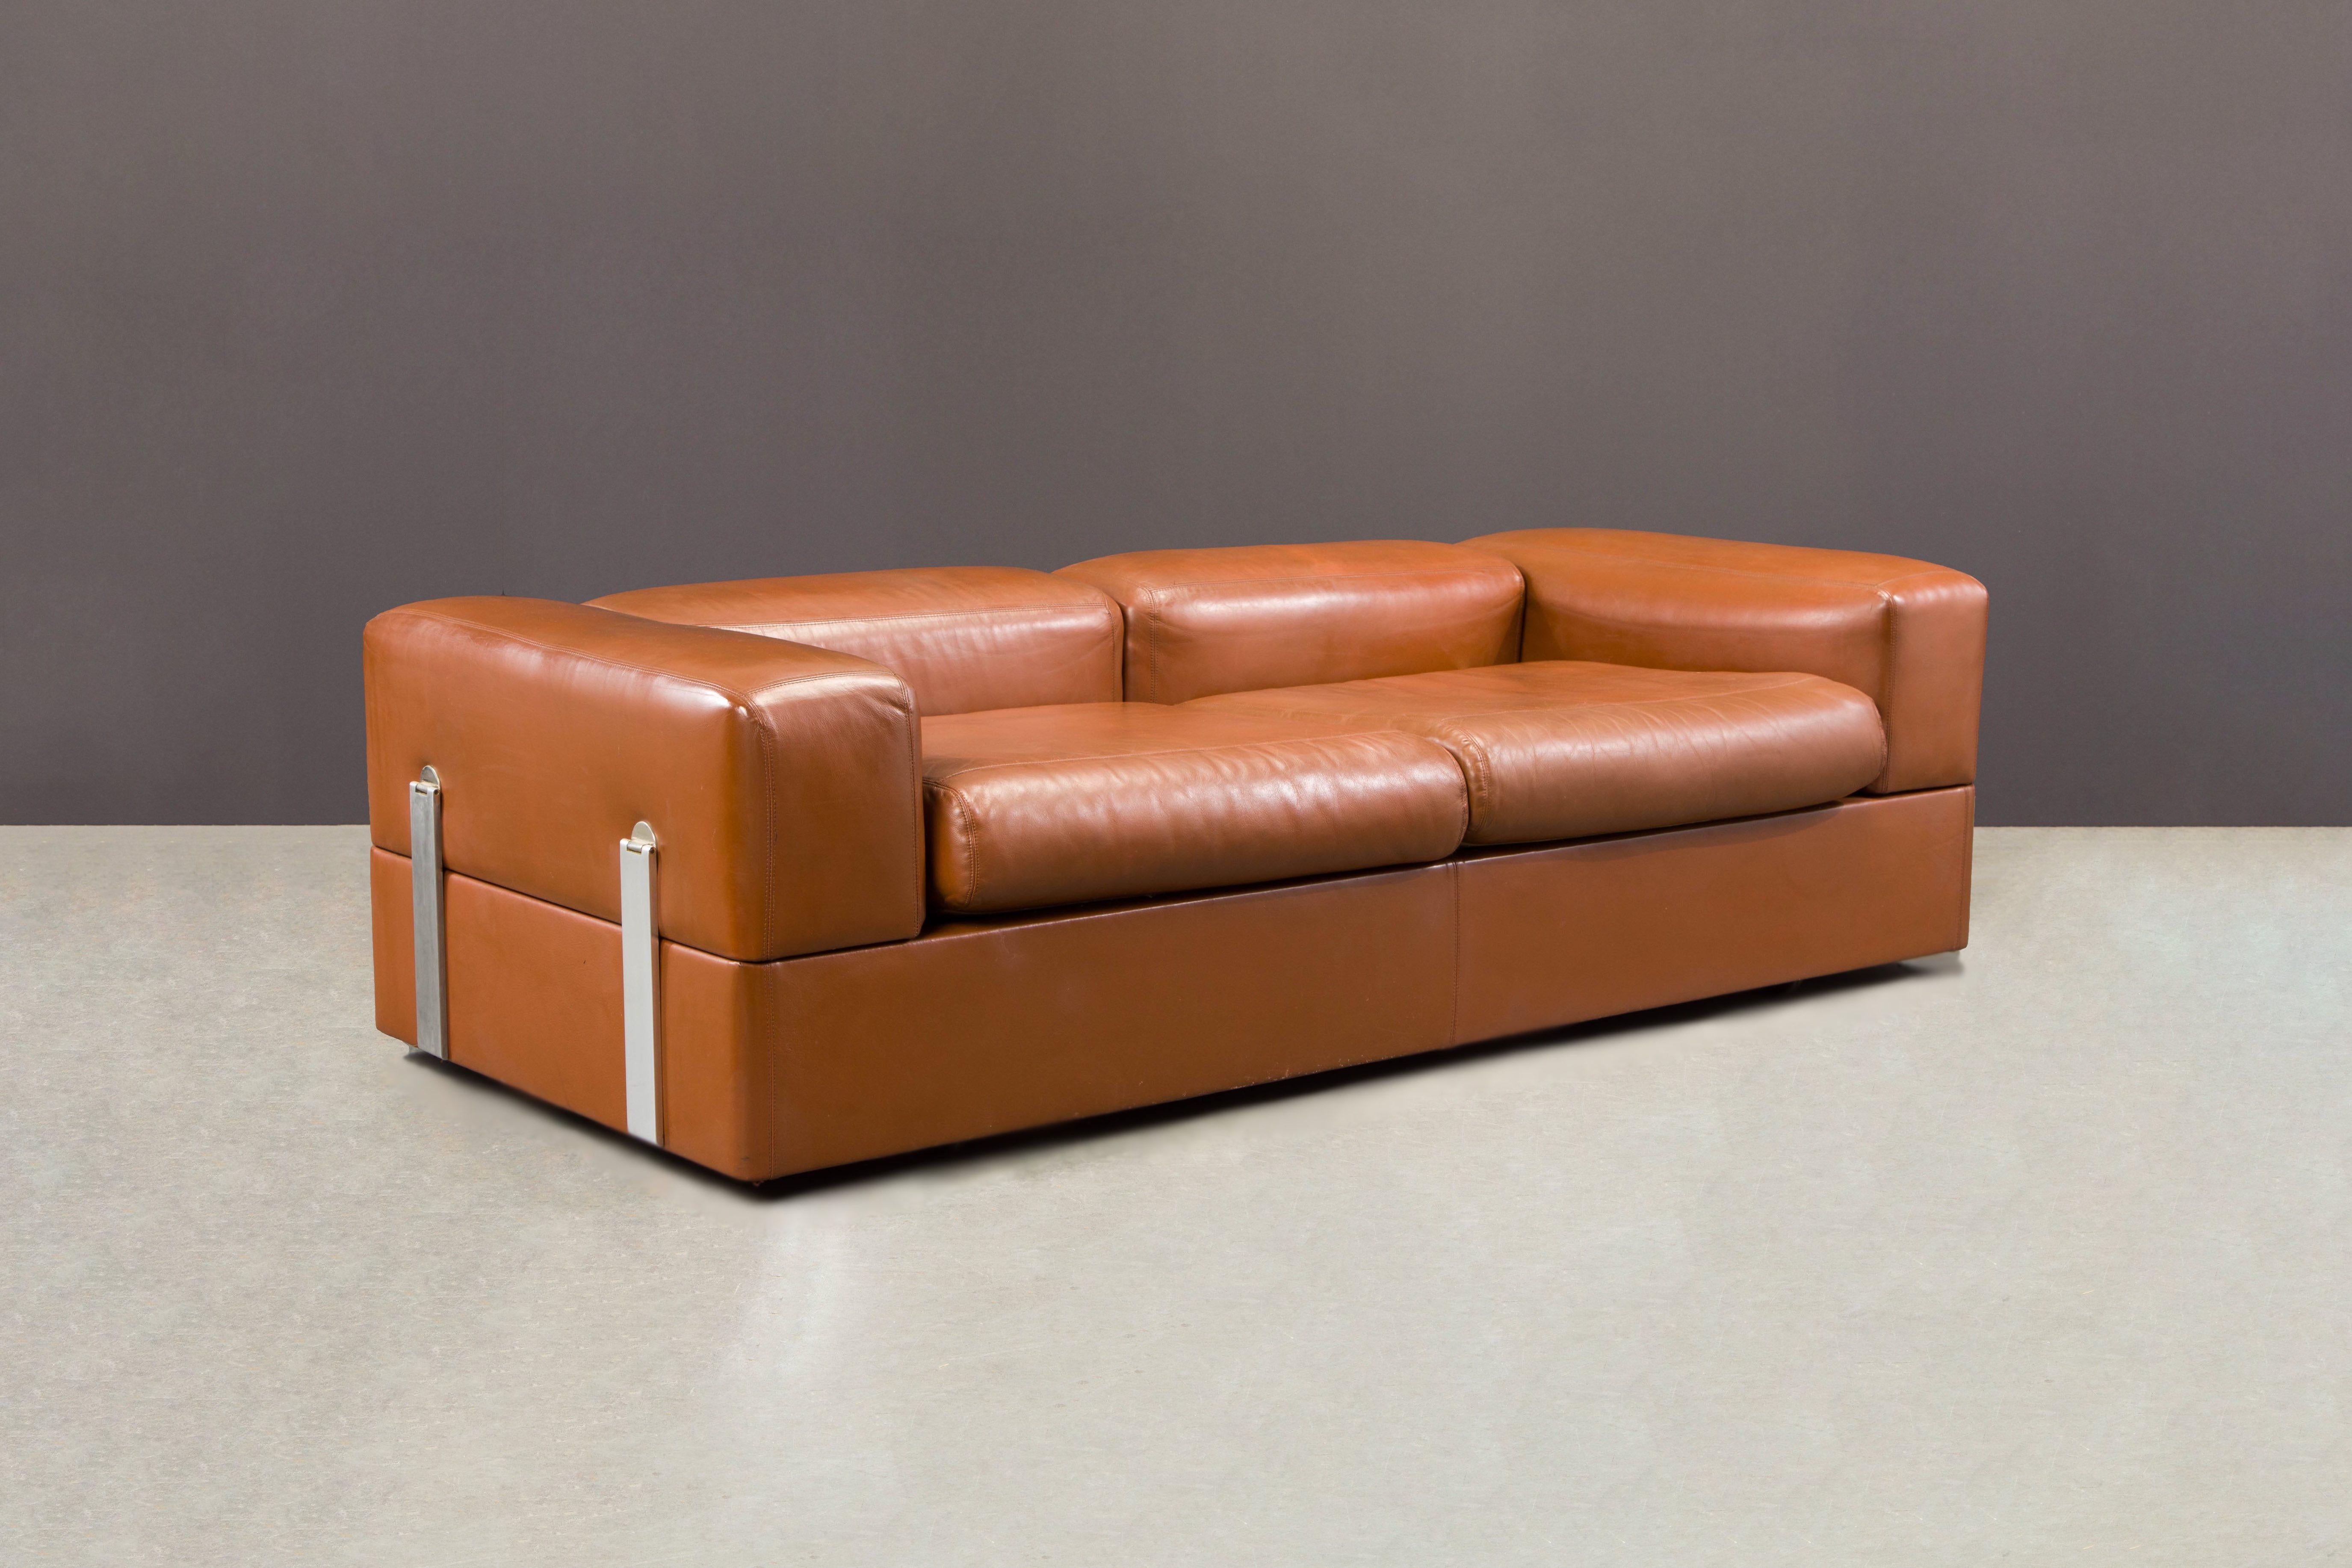 Pair of Tito Agnoli Leather Convertible Sofas for Cinova, 1960s Italy, Signed 1